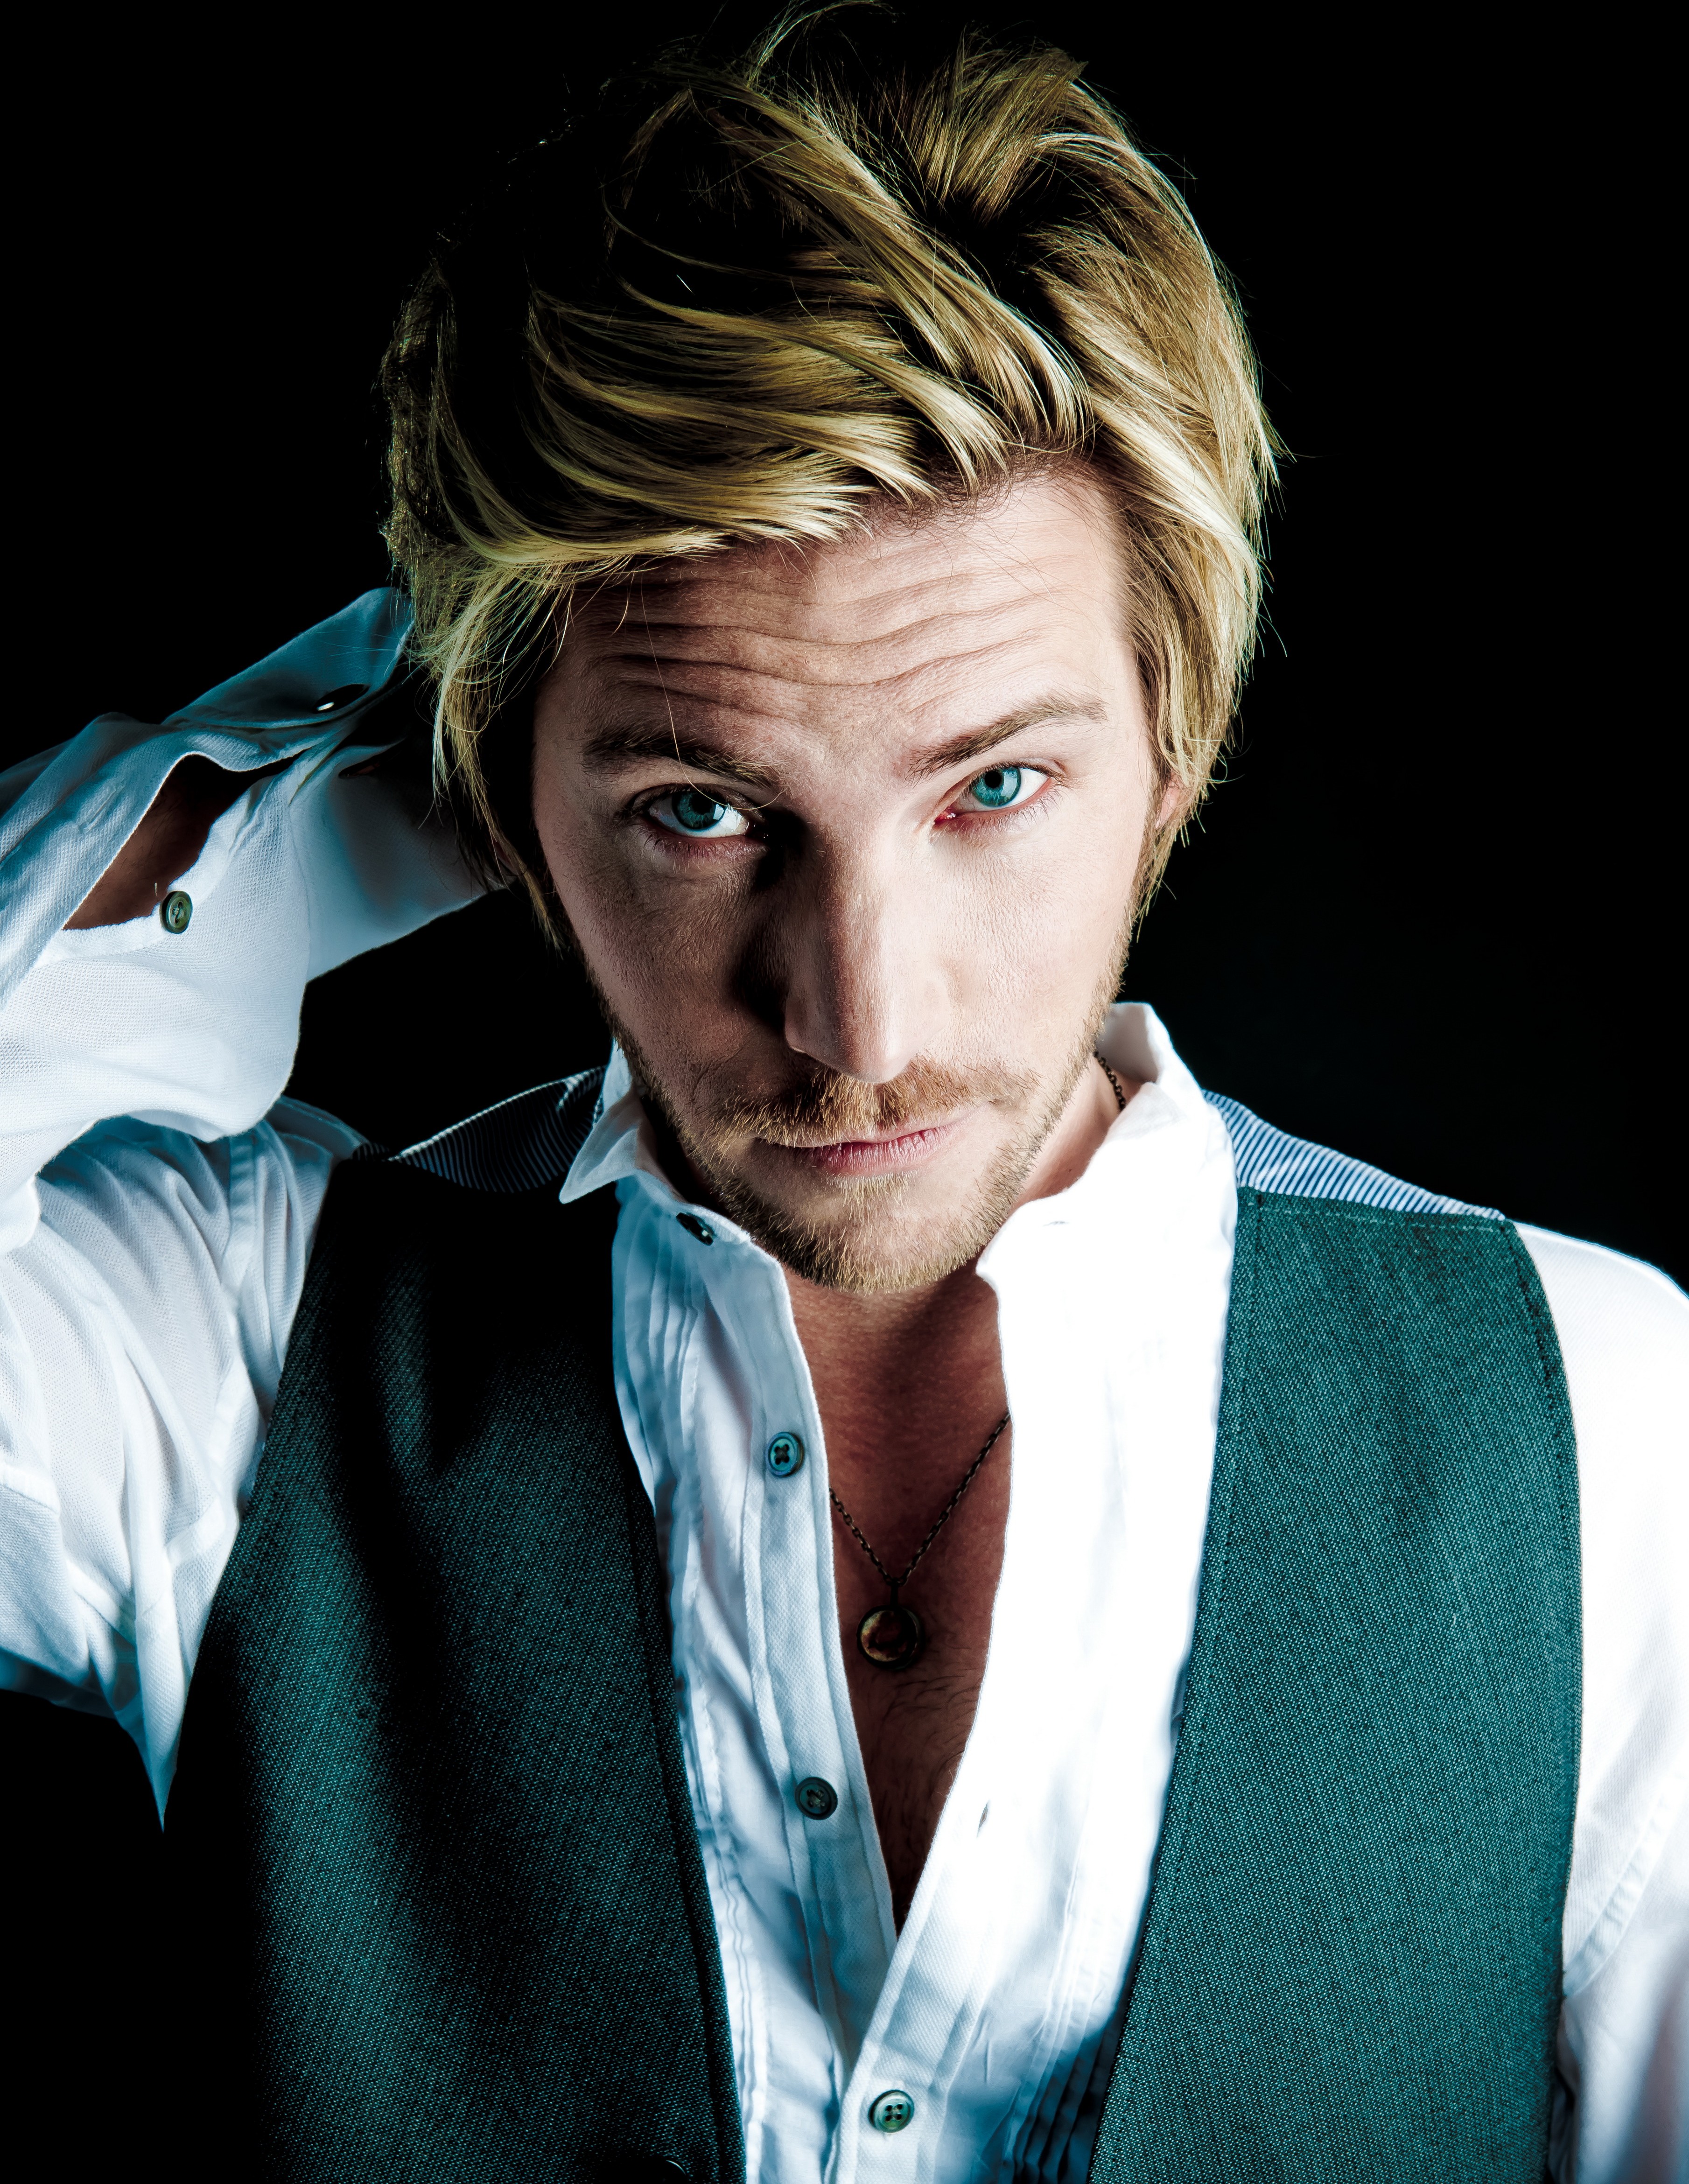 Gaming & anime voice actor Troy Baker is heading to FACTS!